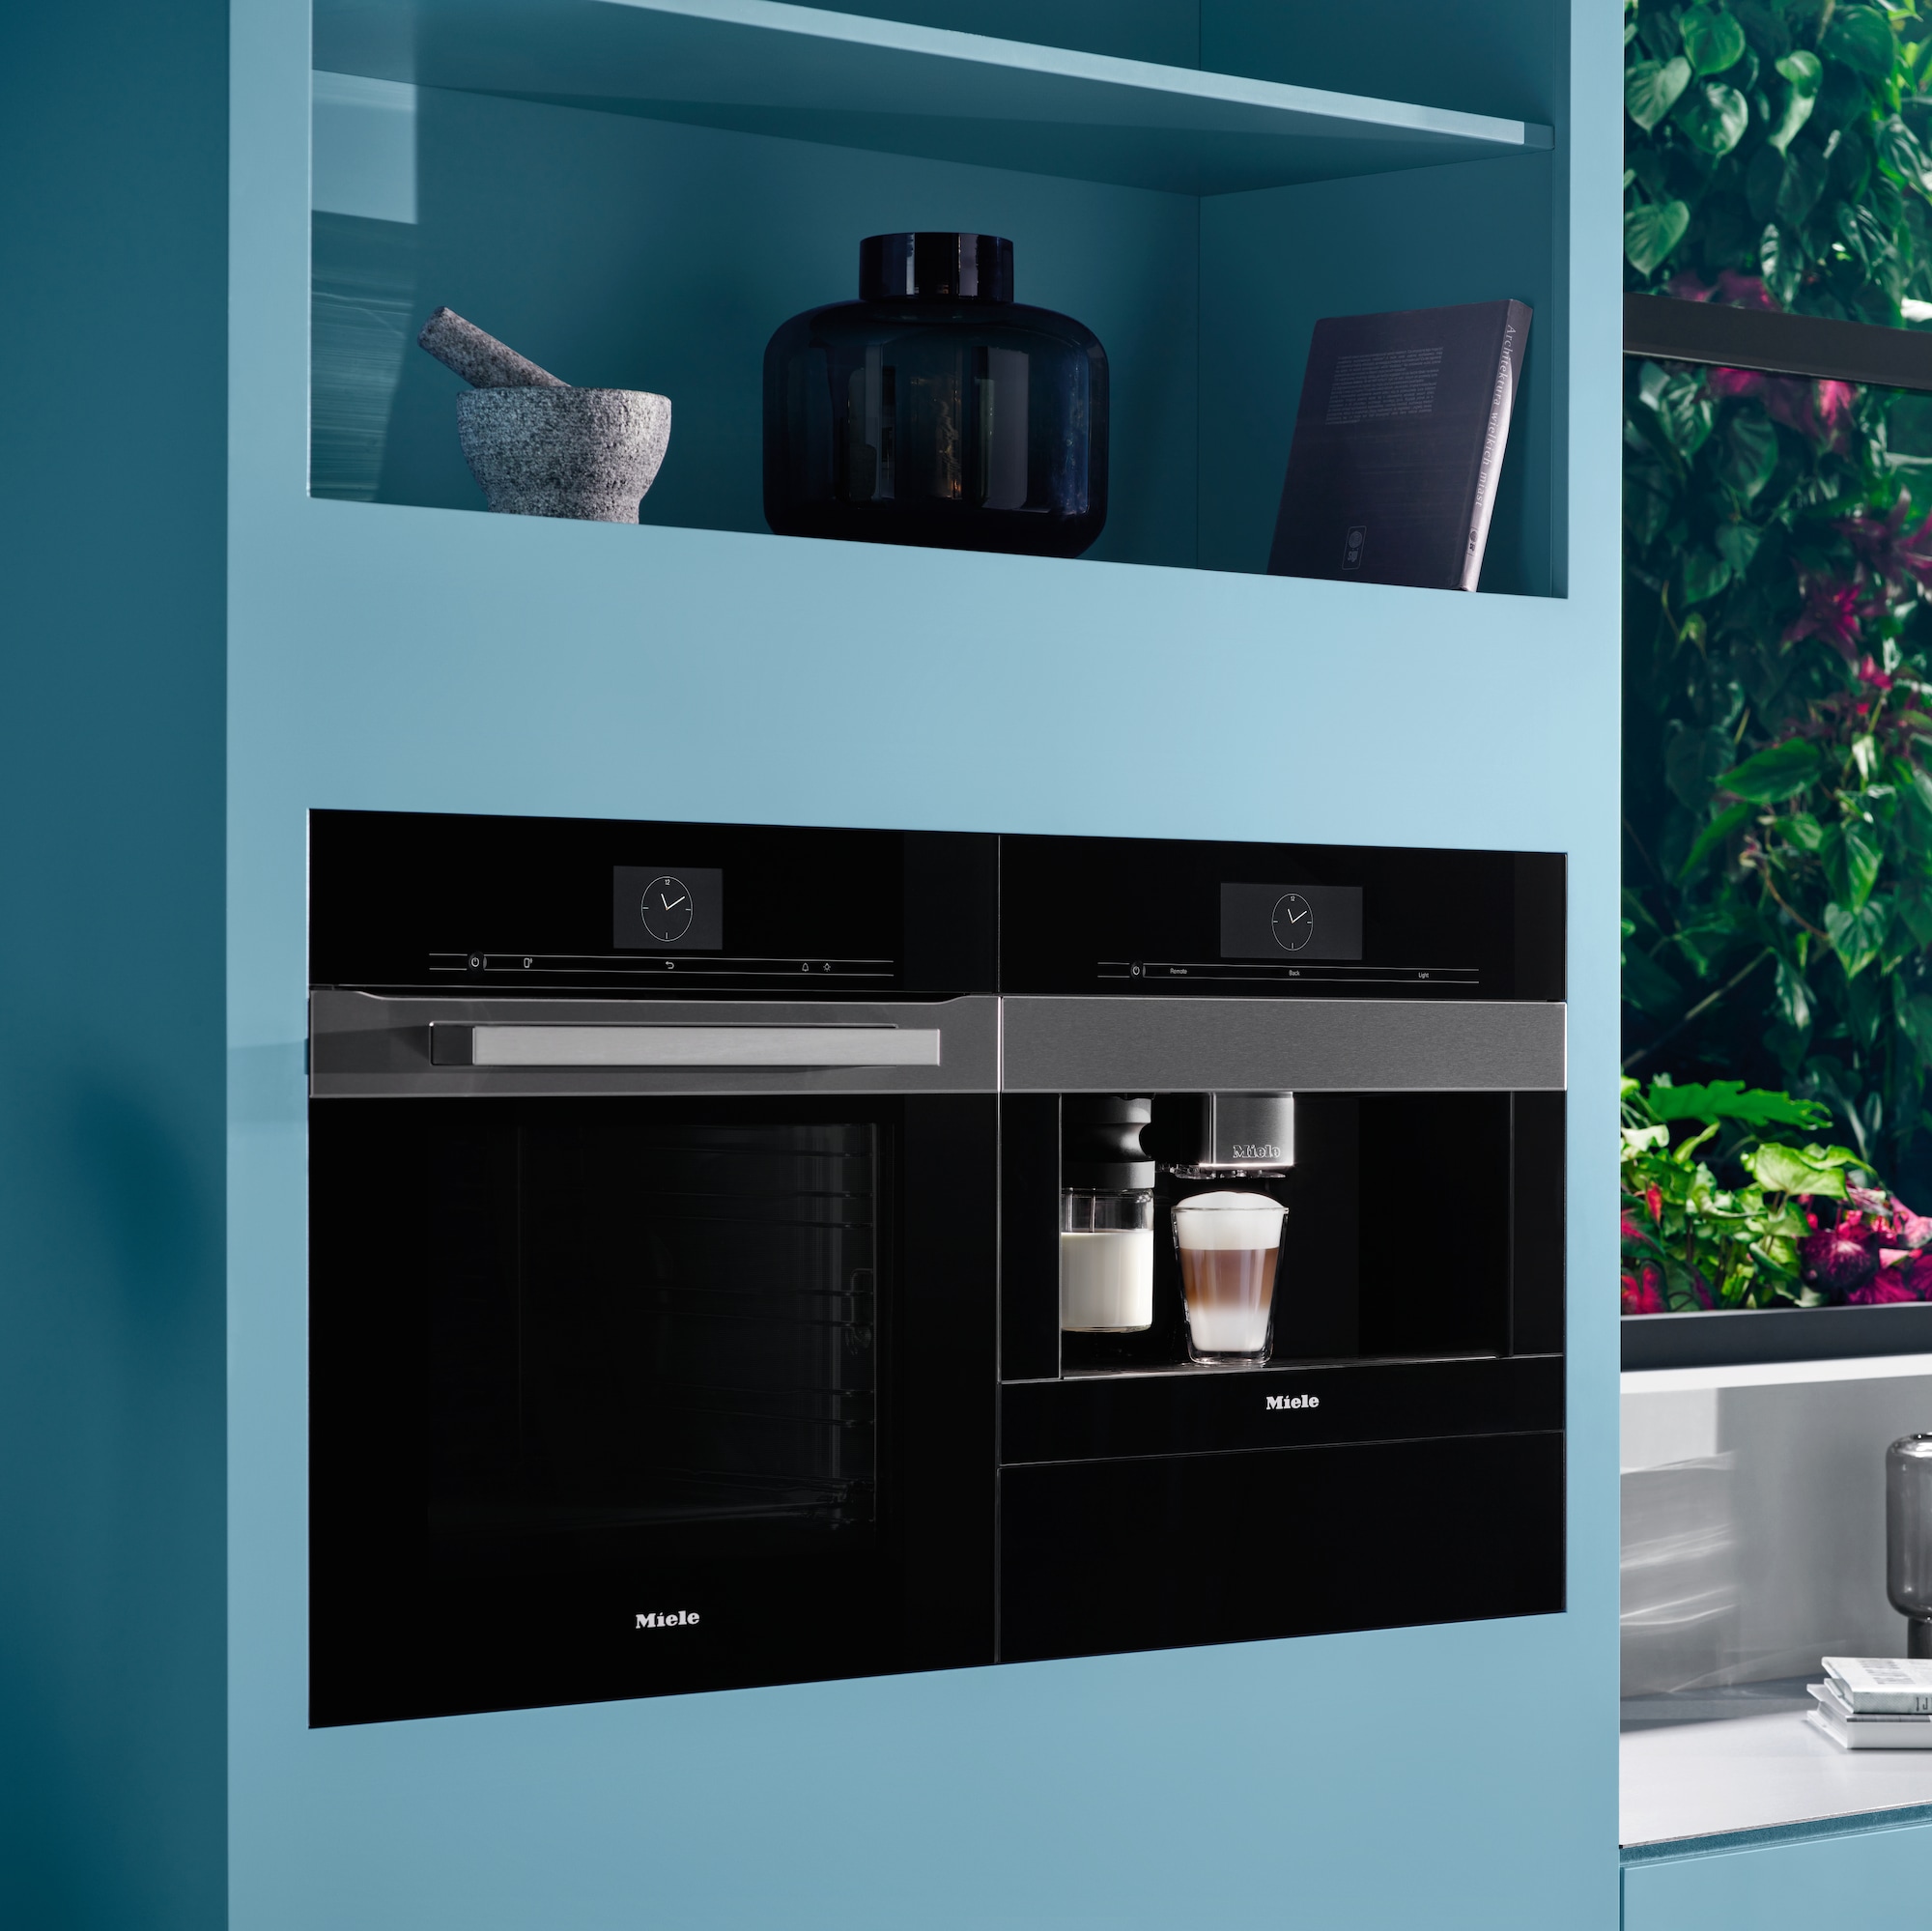 Symptomer Automatisering kimplante Generation 7000 High End Kitchen Appliances | Learn More | Miele